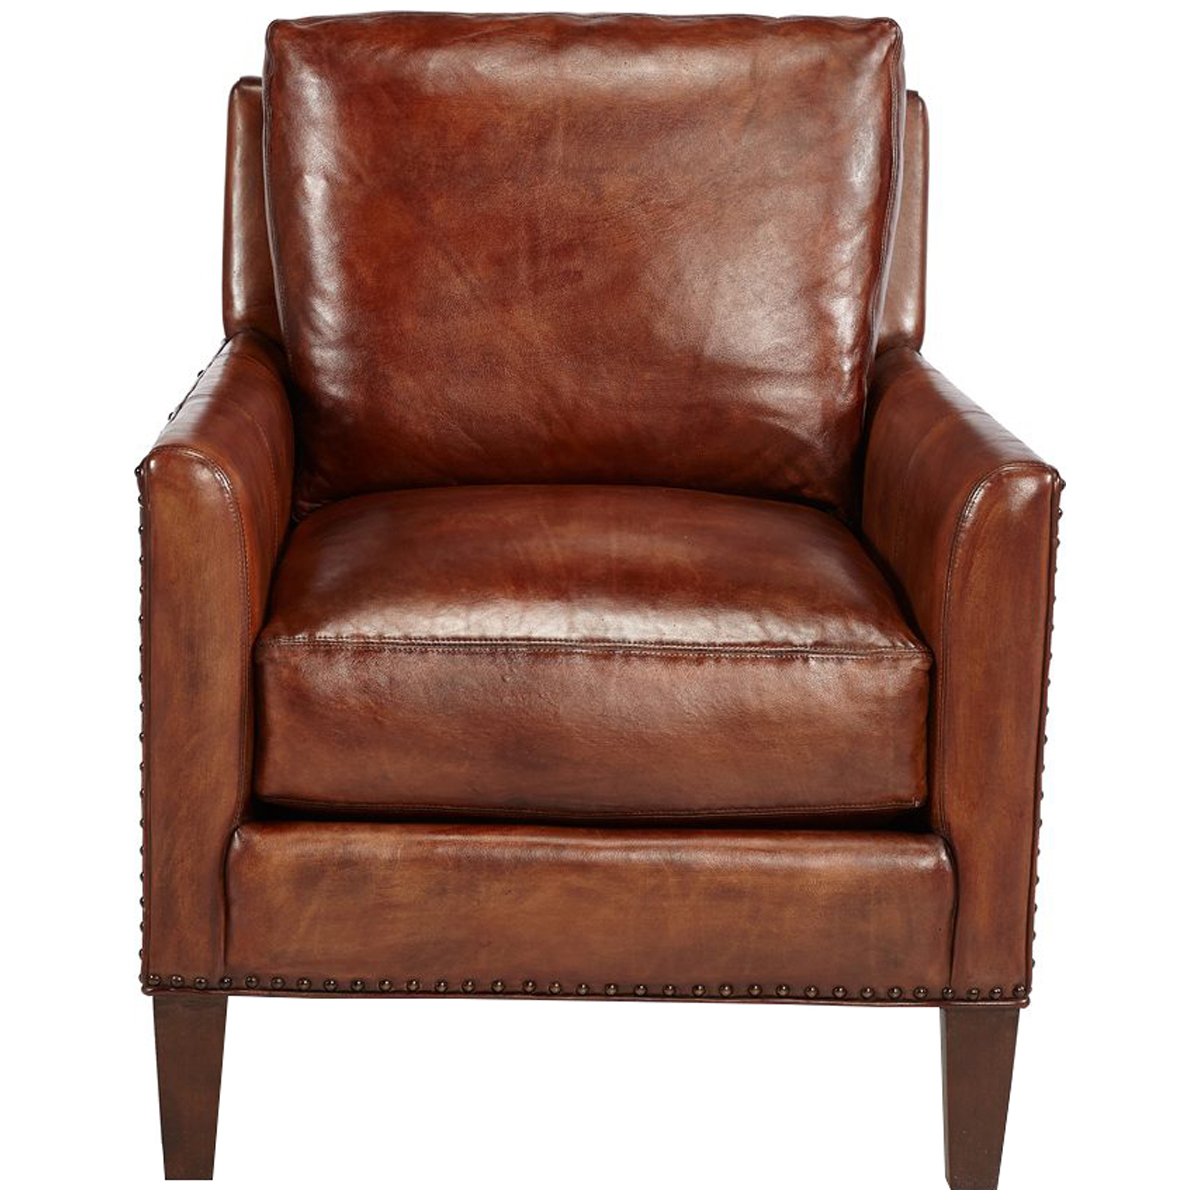 Hickory White Leather Upholstered Carob Brown Arm Chair